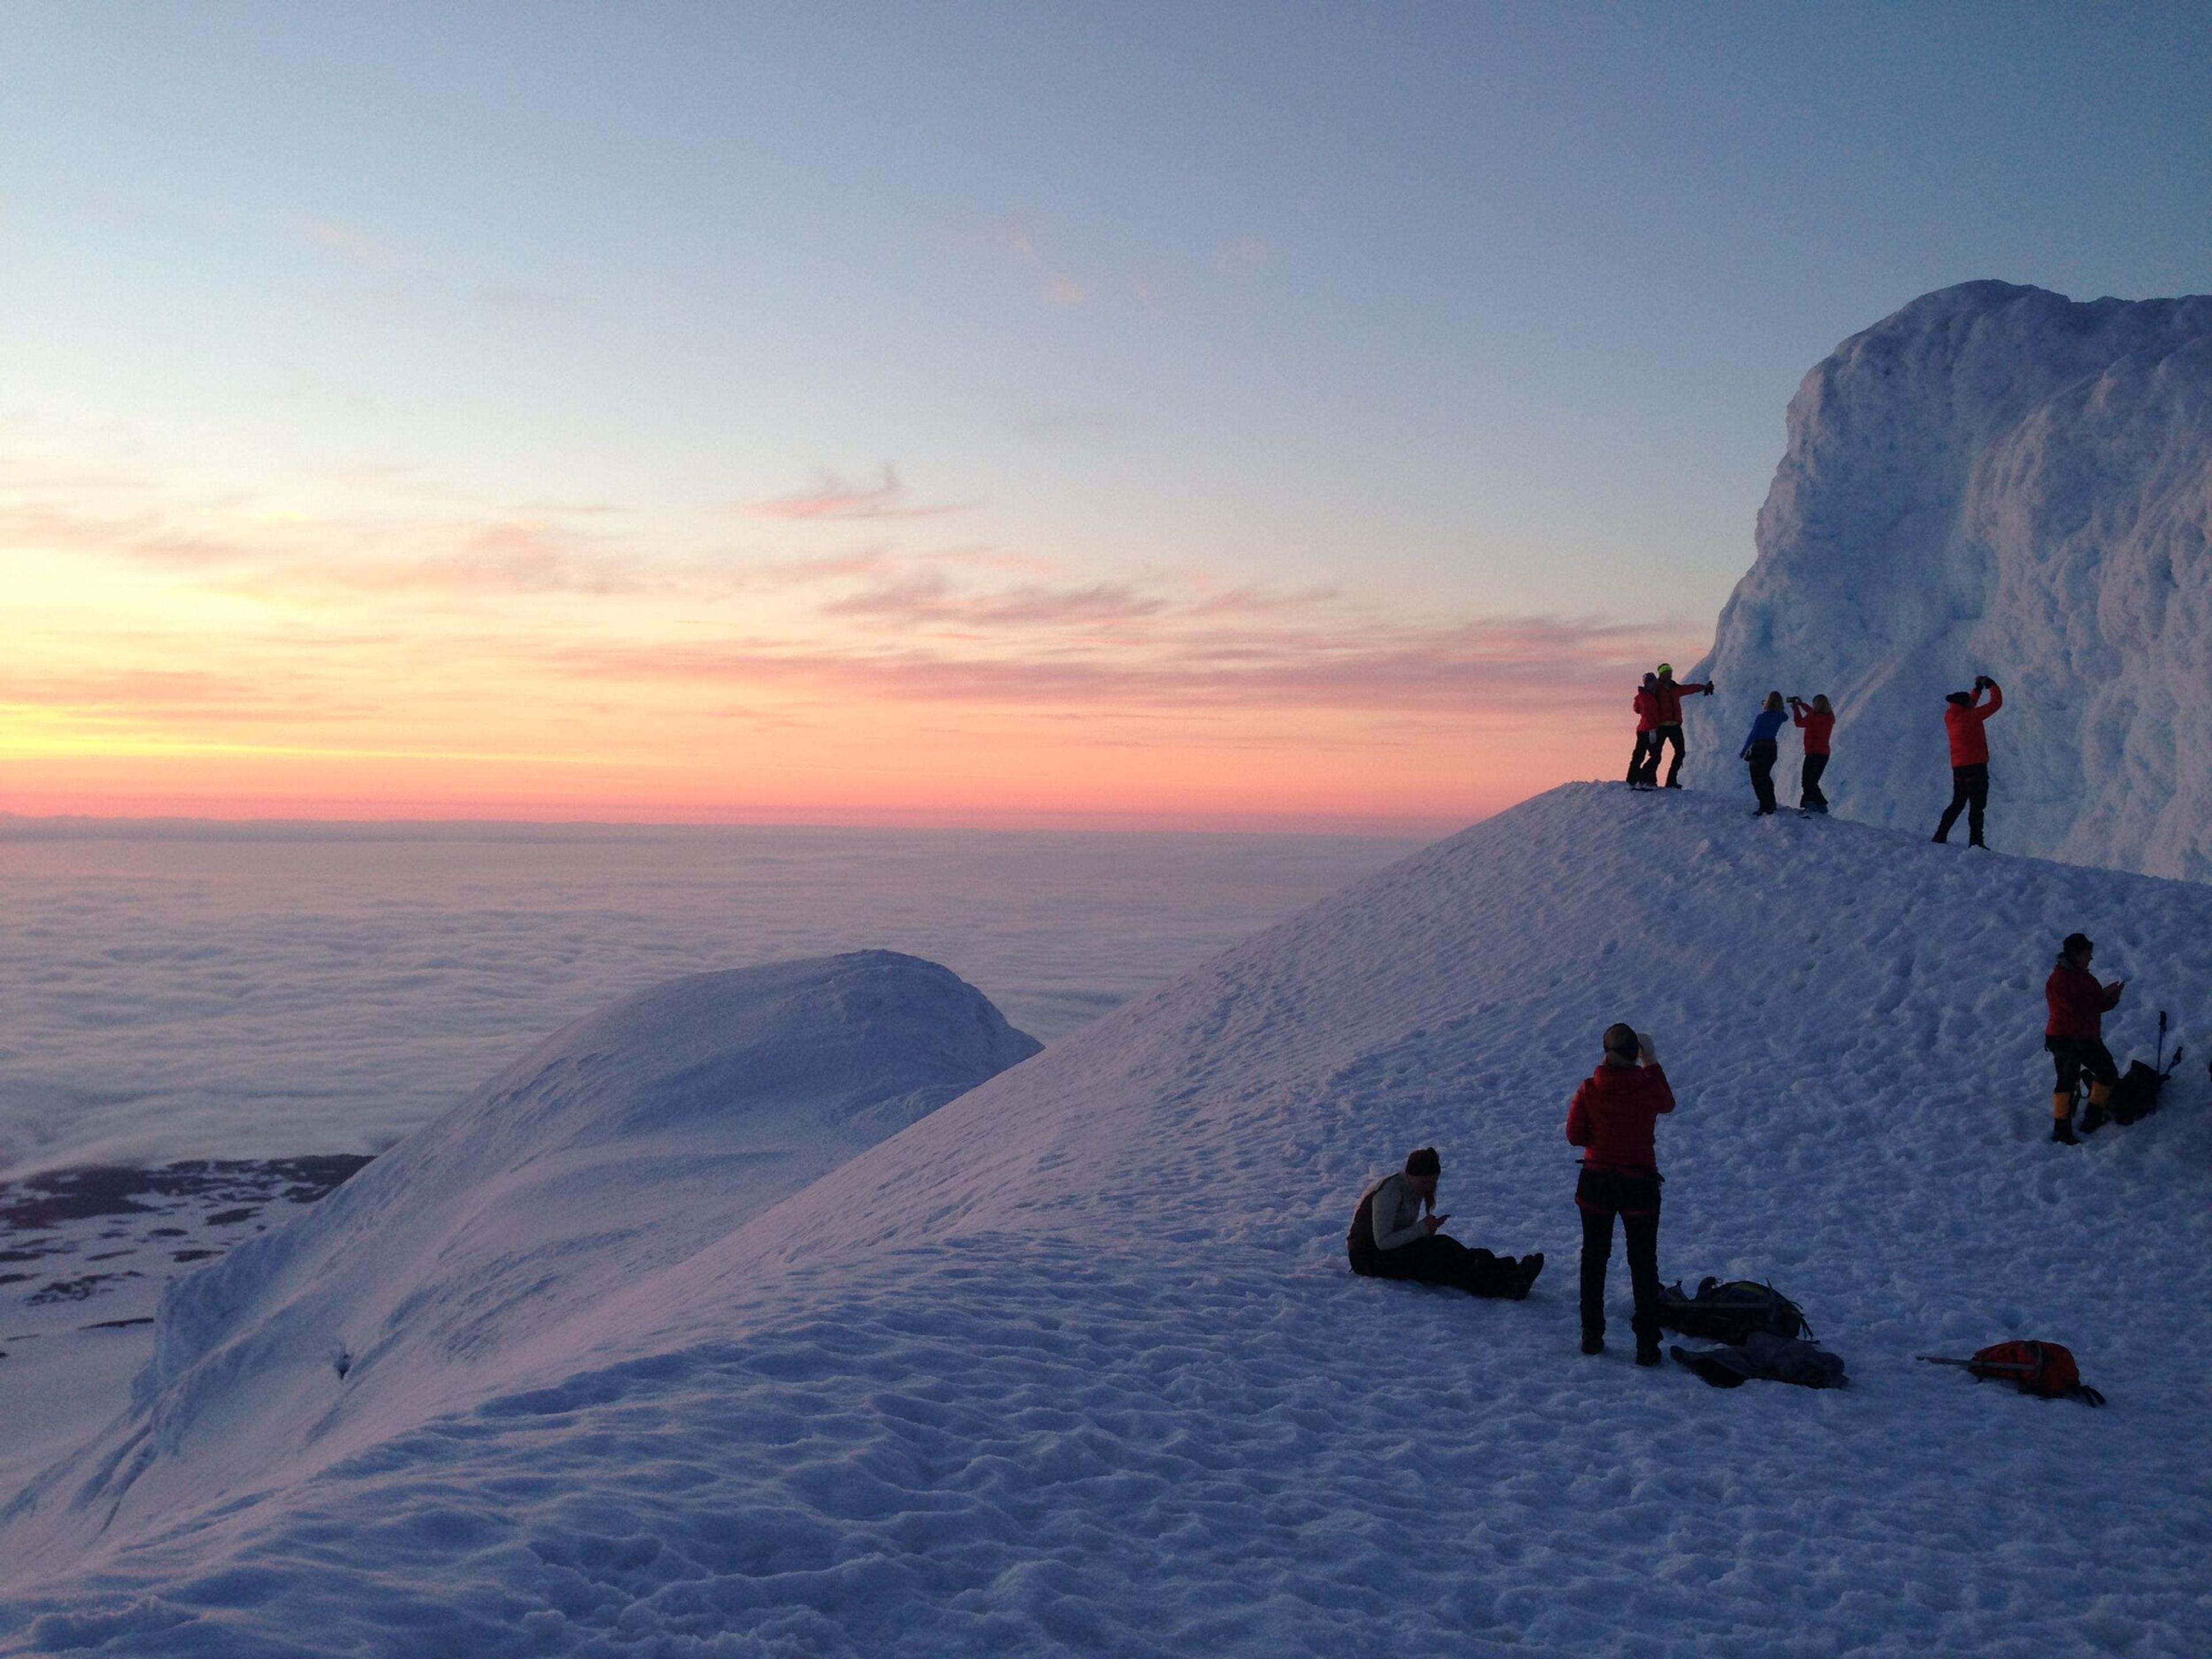 Group of hikers taking pictures on their hike to the Snæfellsjökull glacier summit. Sunset on the background.